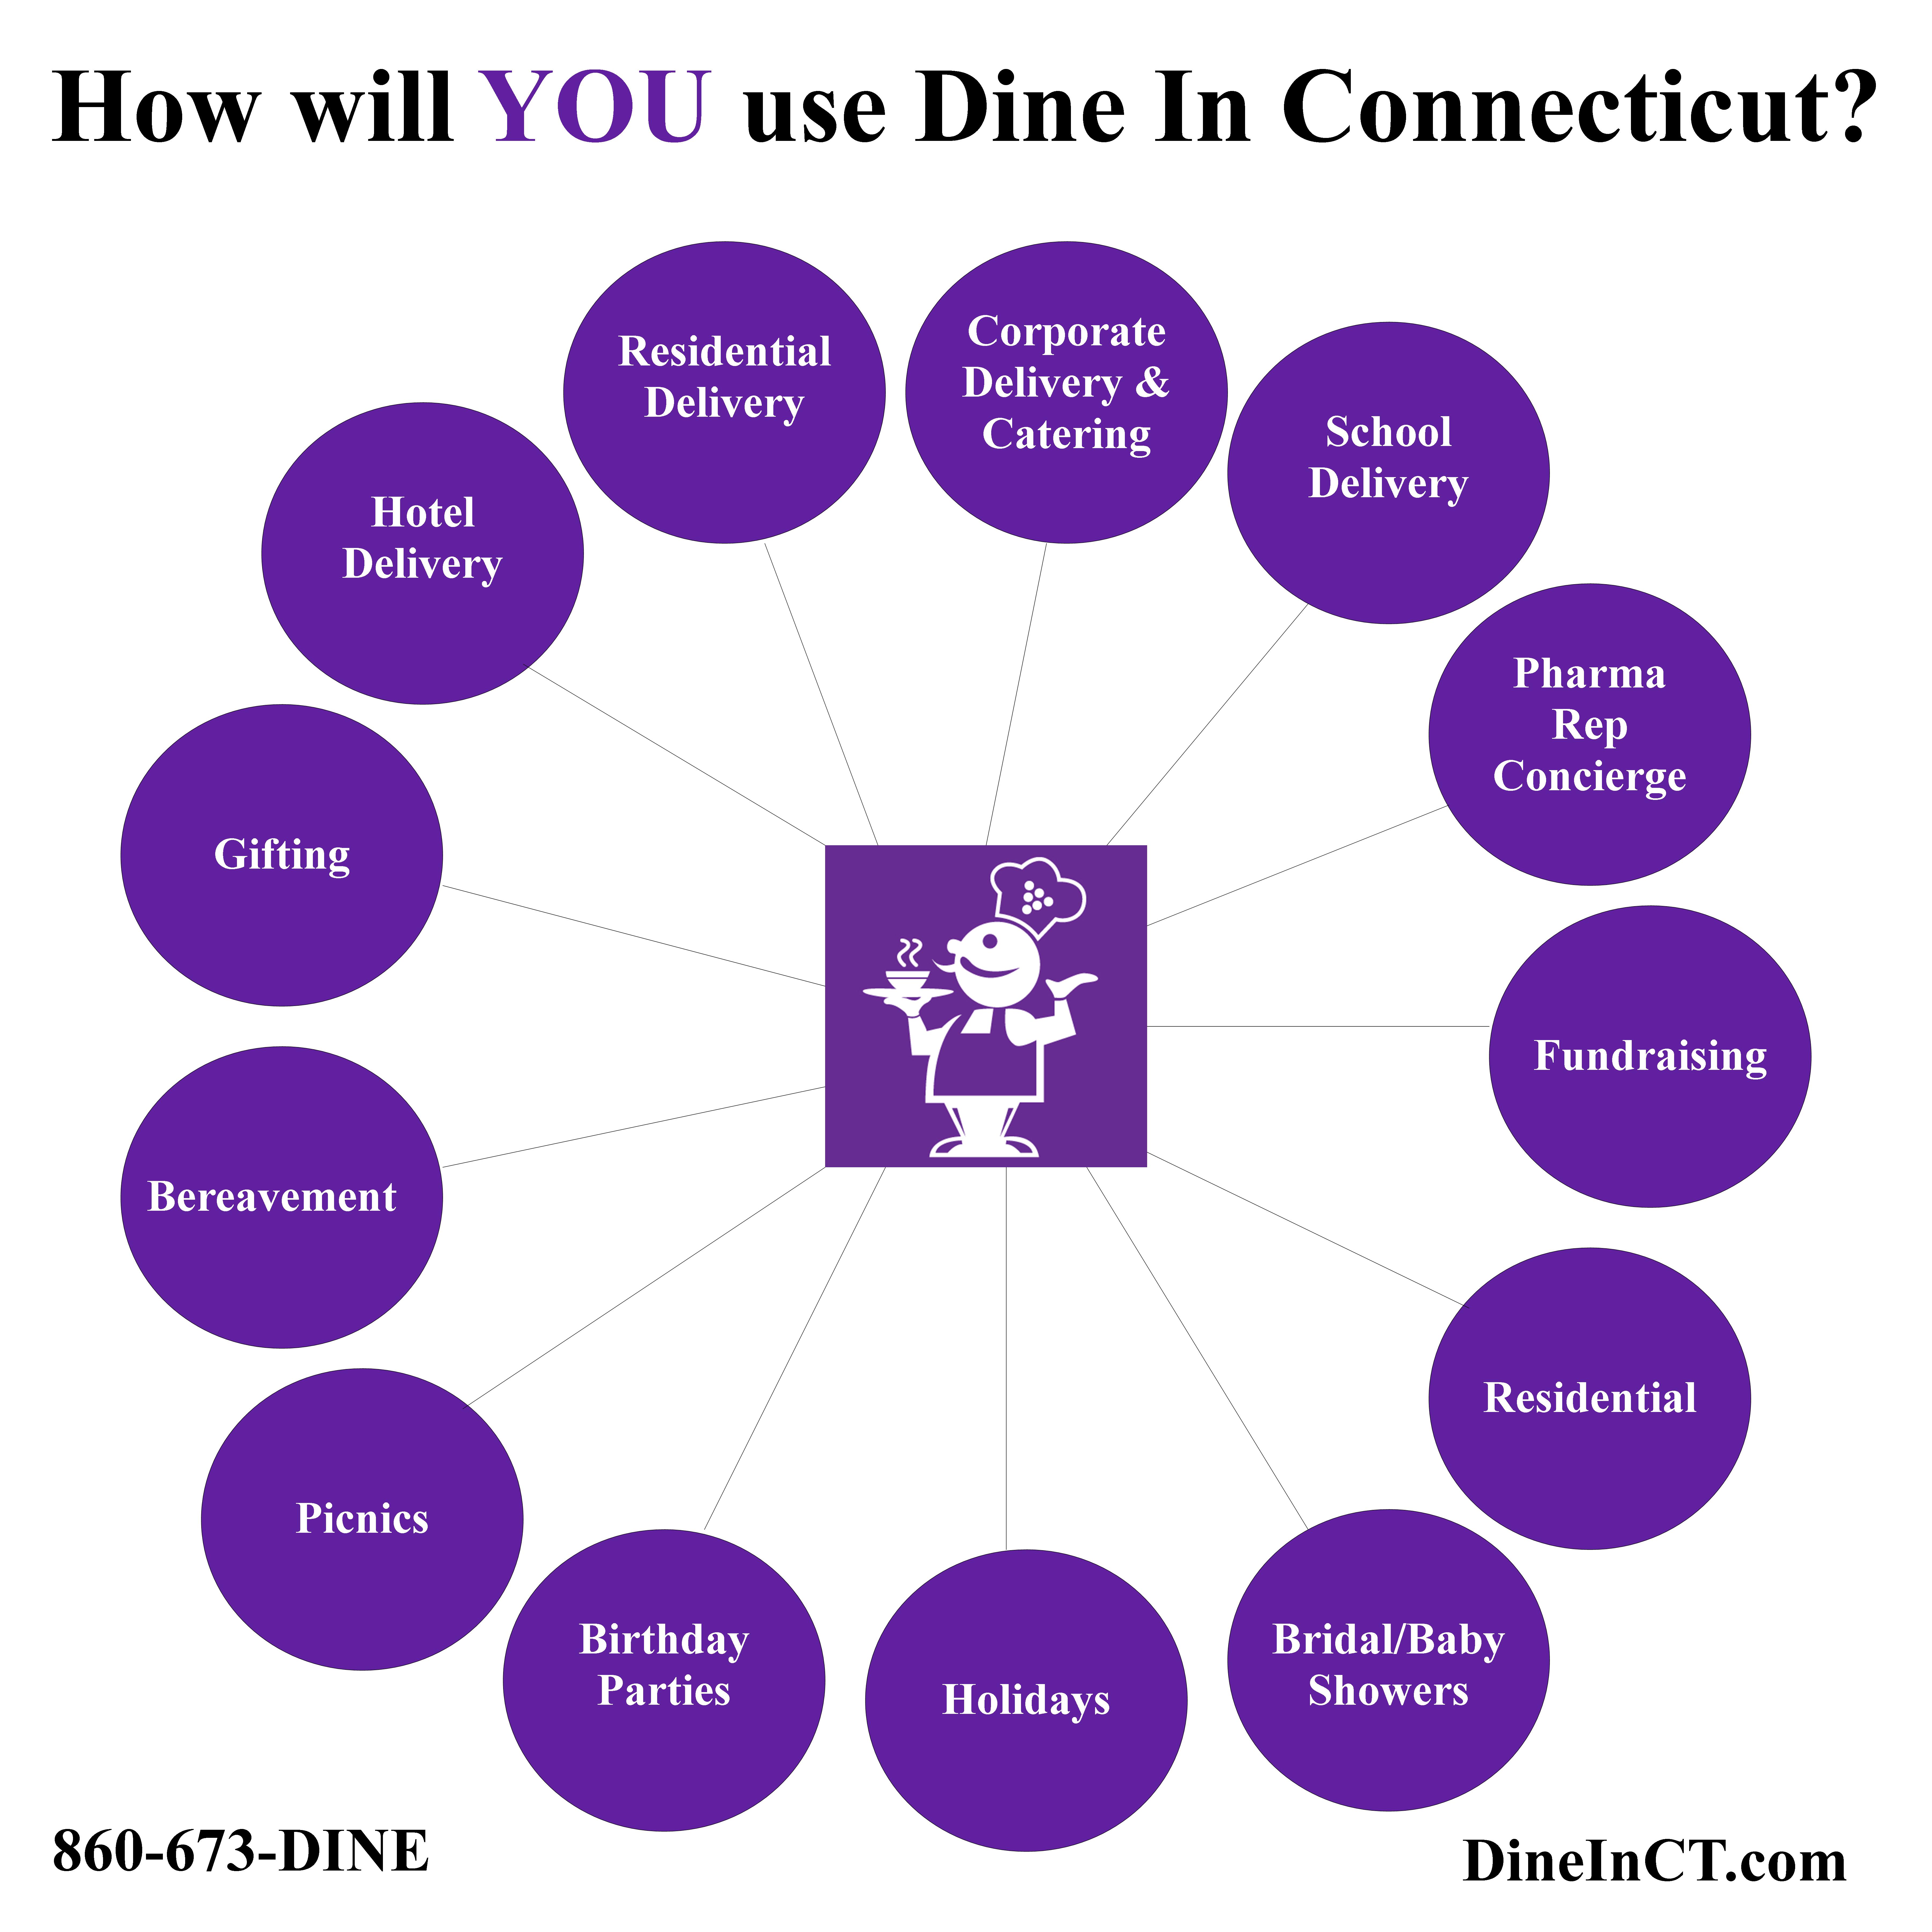 Dine In CT